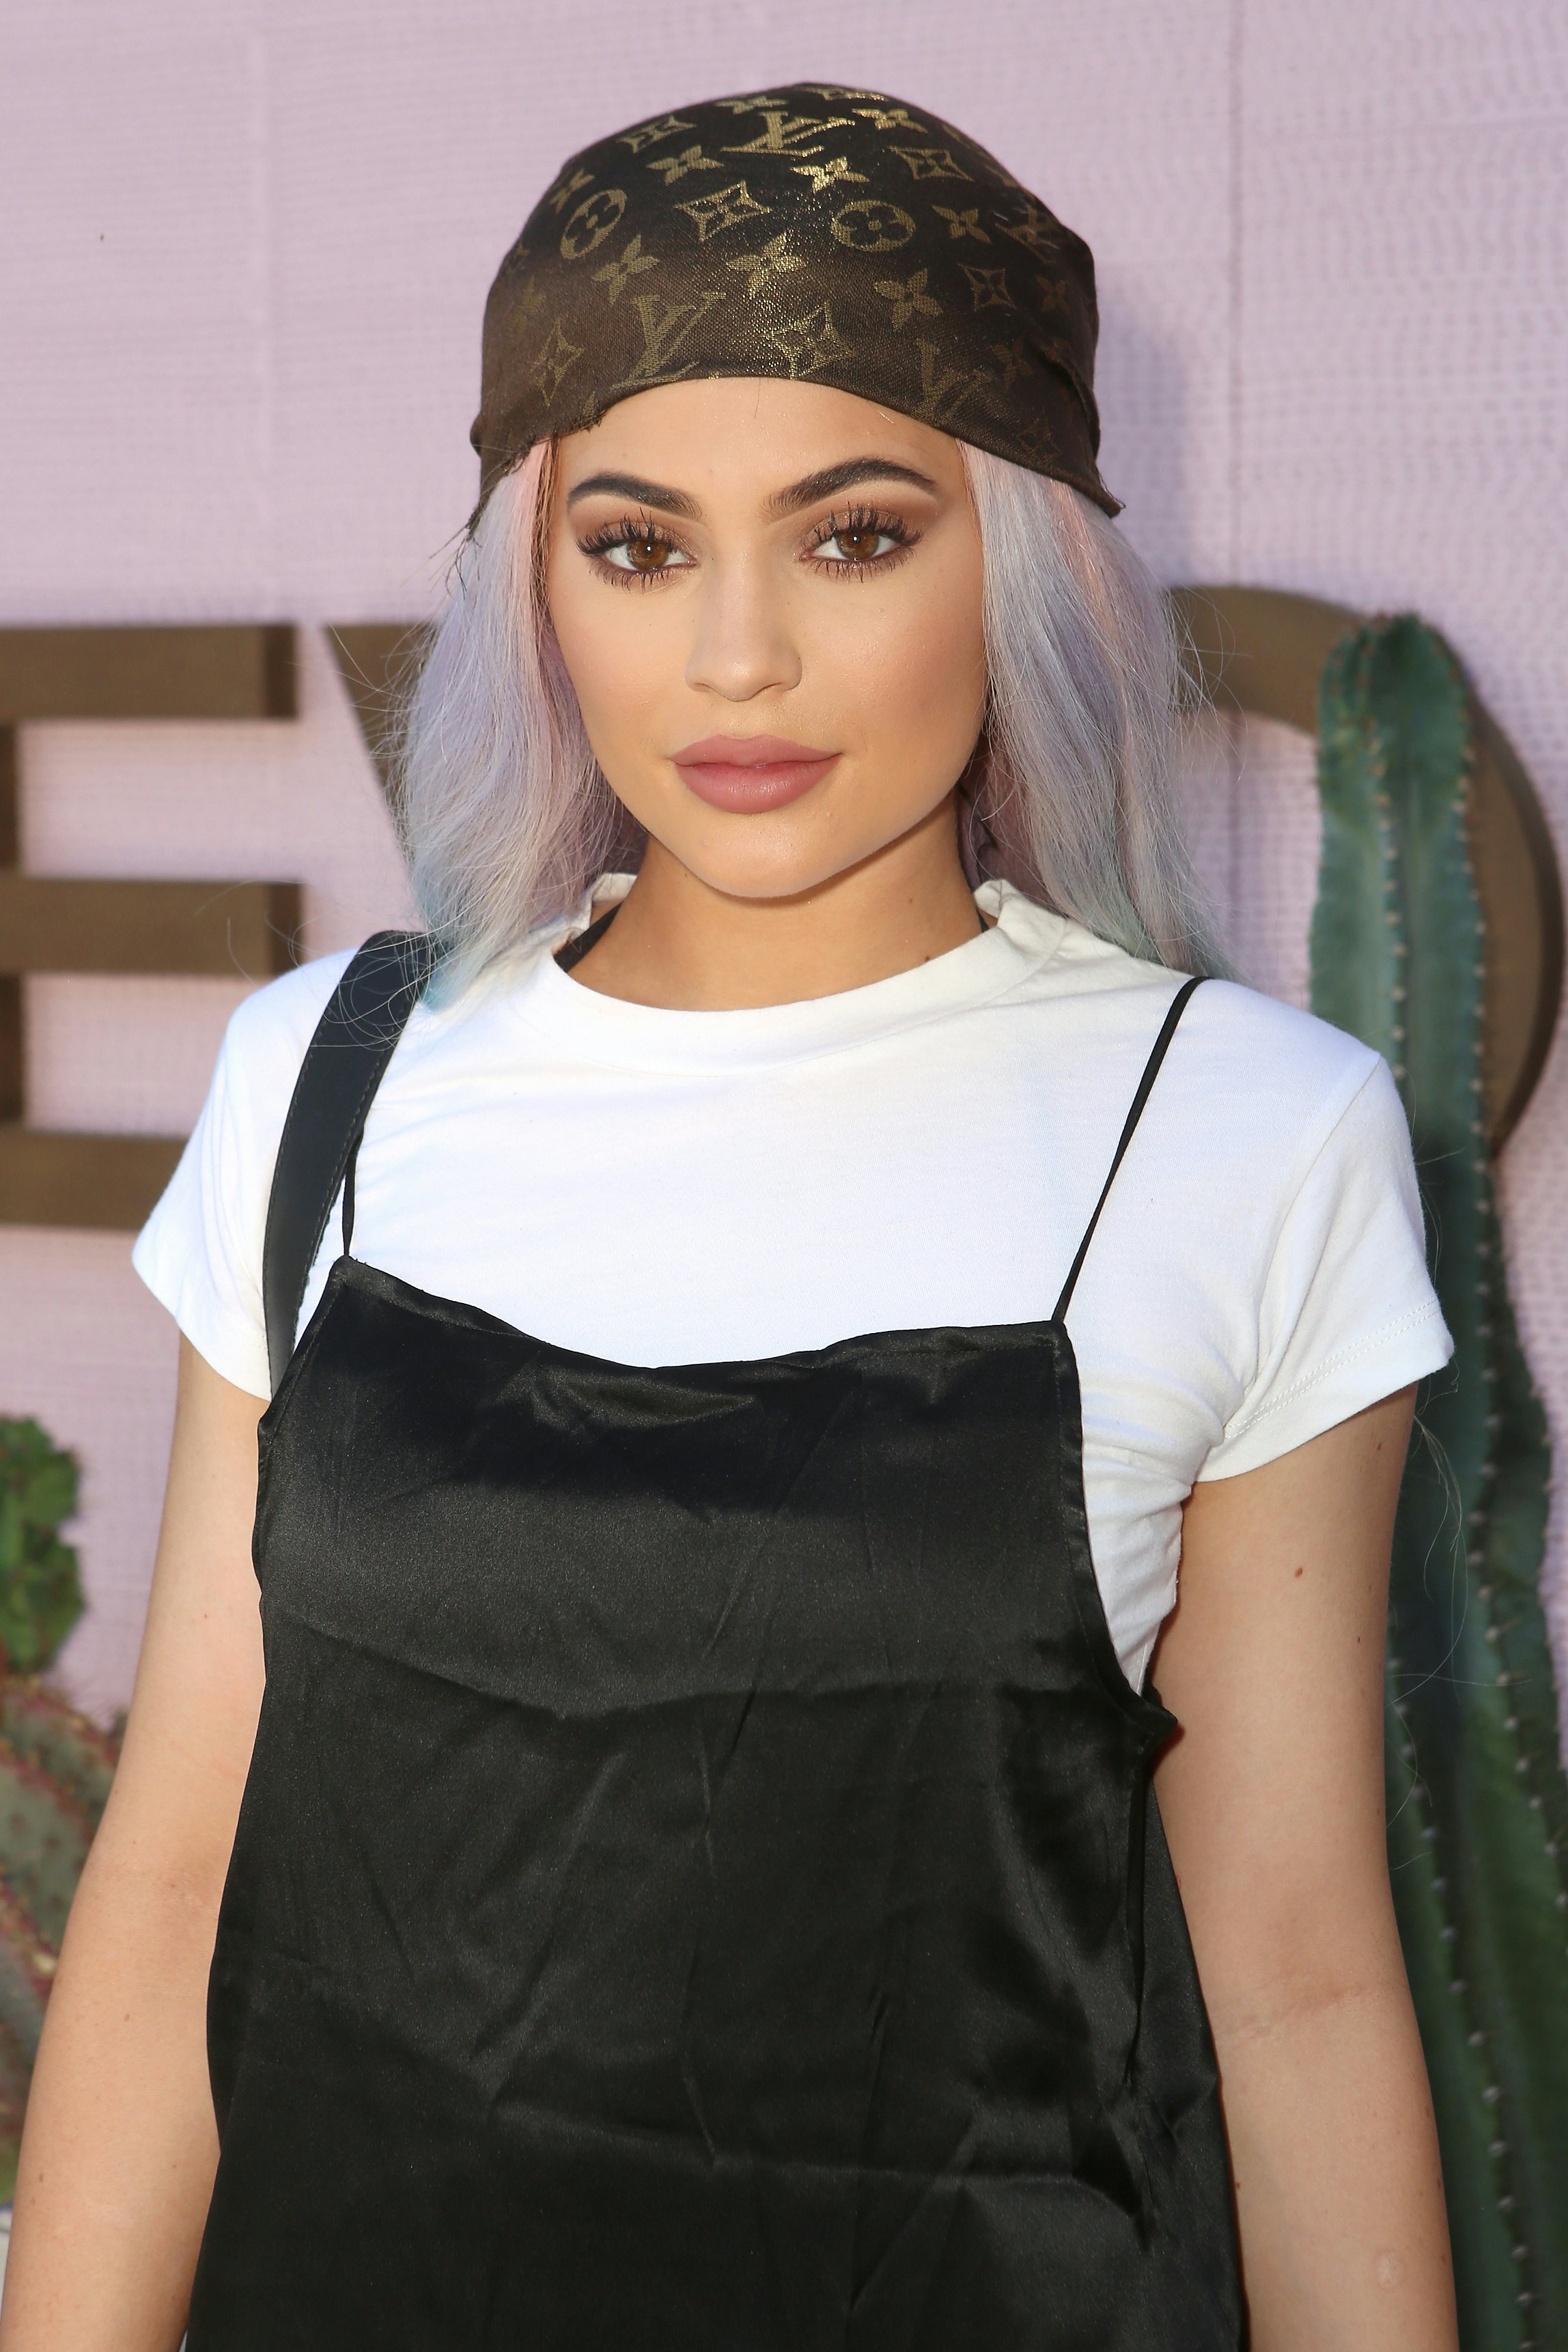 Twitter Is Rightfully Furious About Kylie Jenner Wearing a DuRag